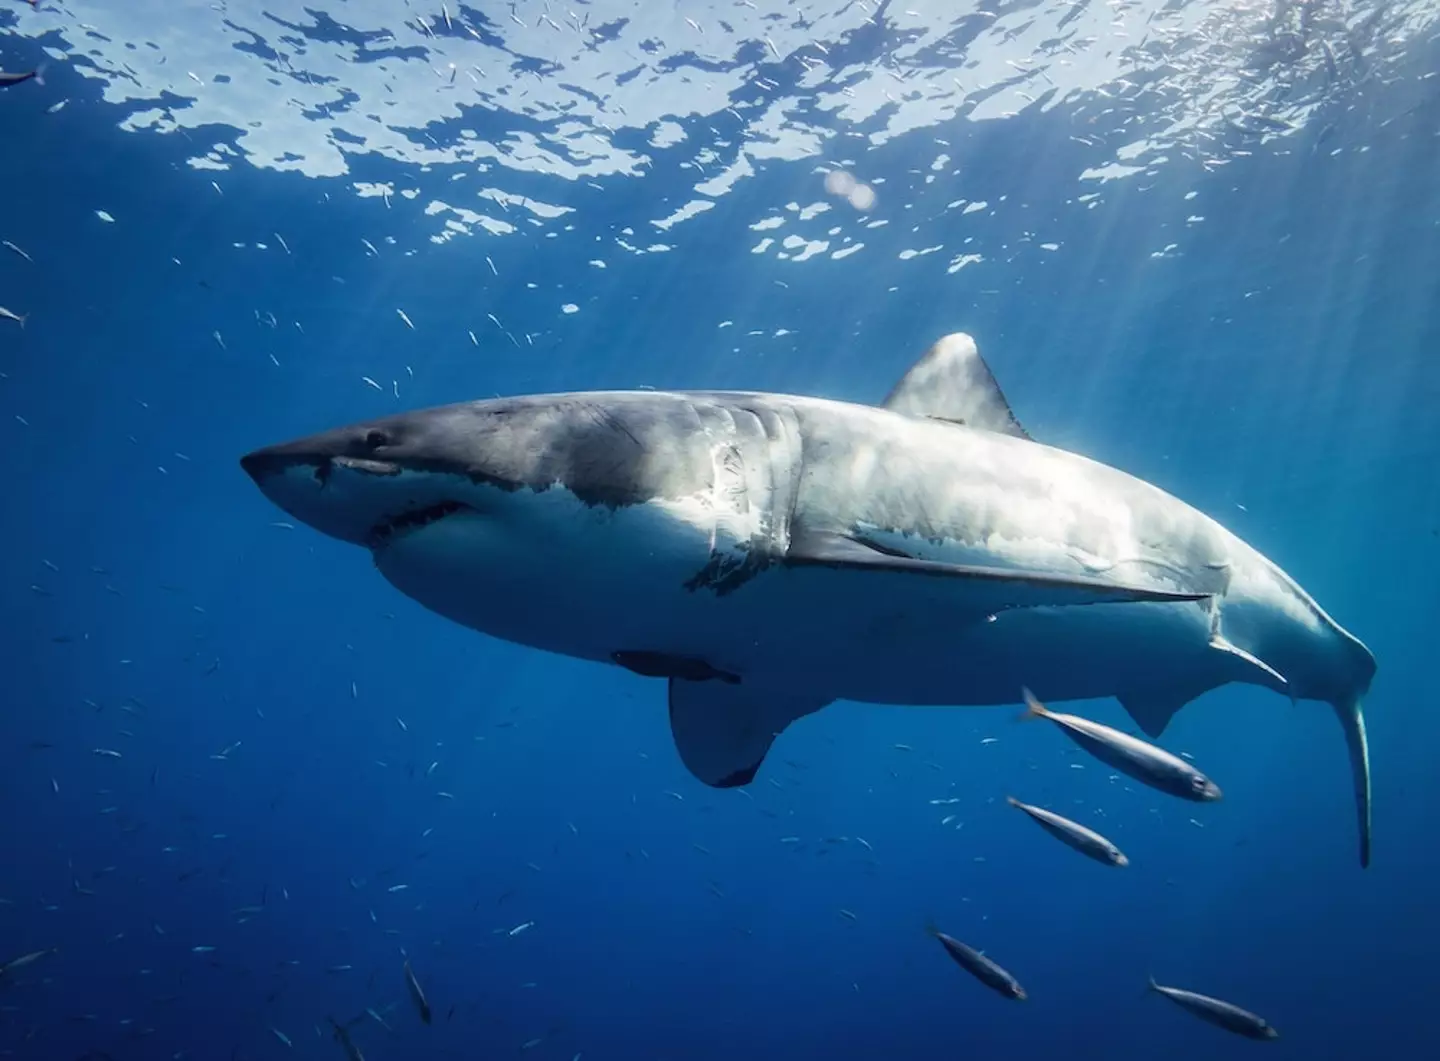 Shark experts analysed the bite marks and determined it was likely a great white.